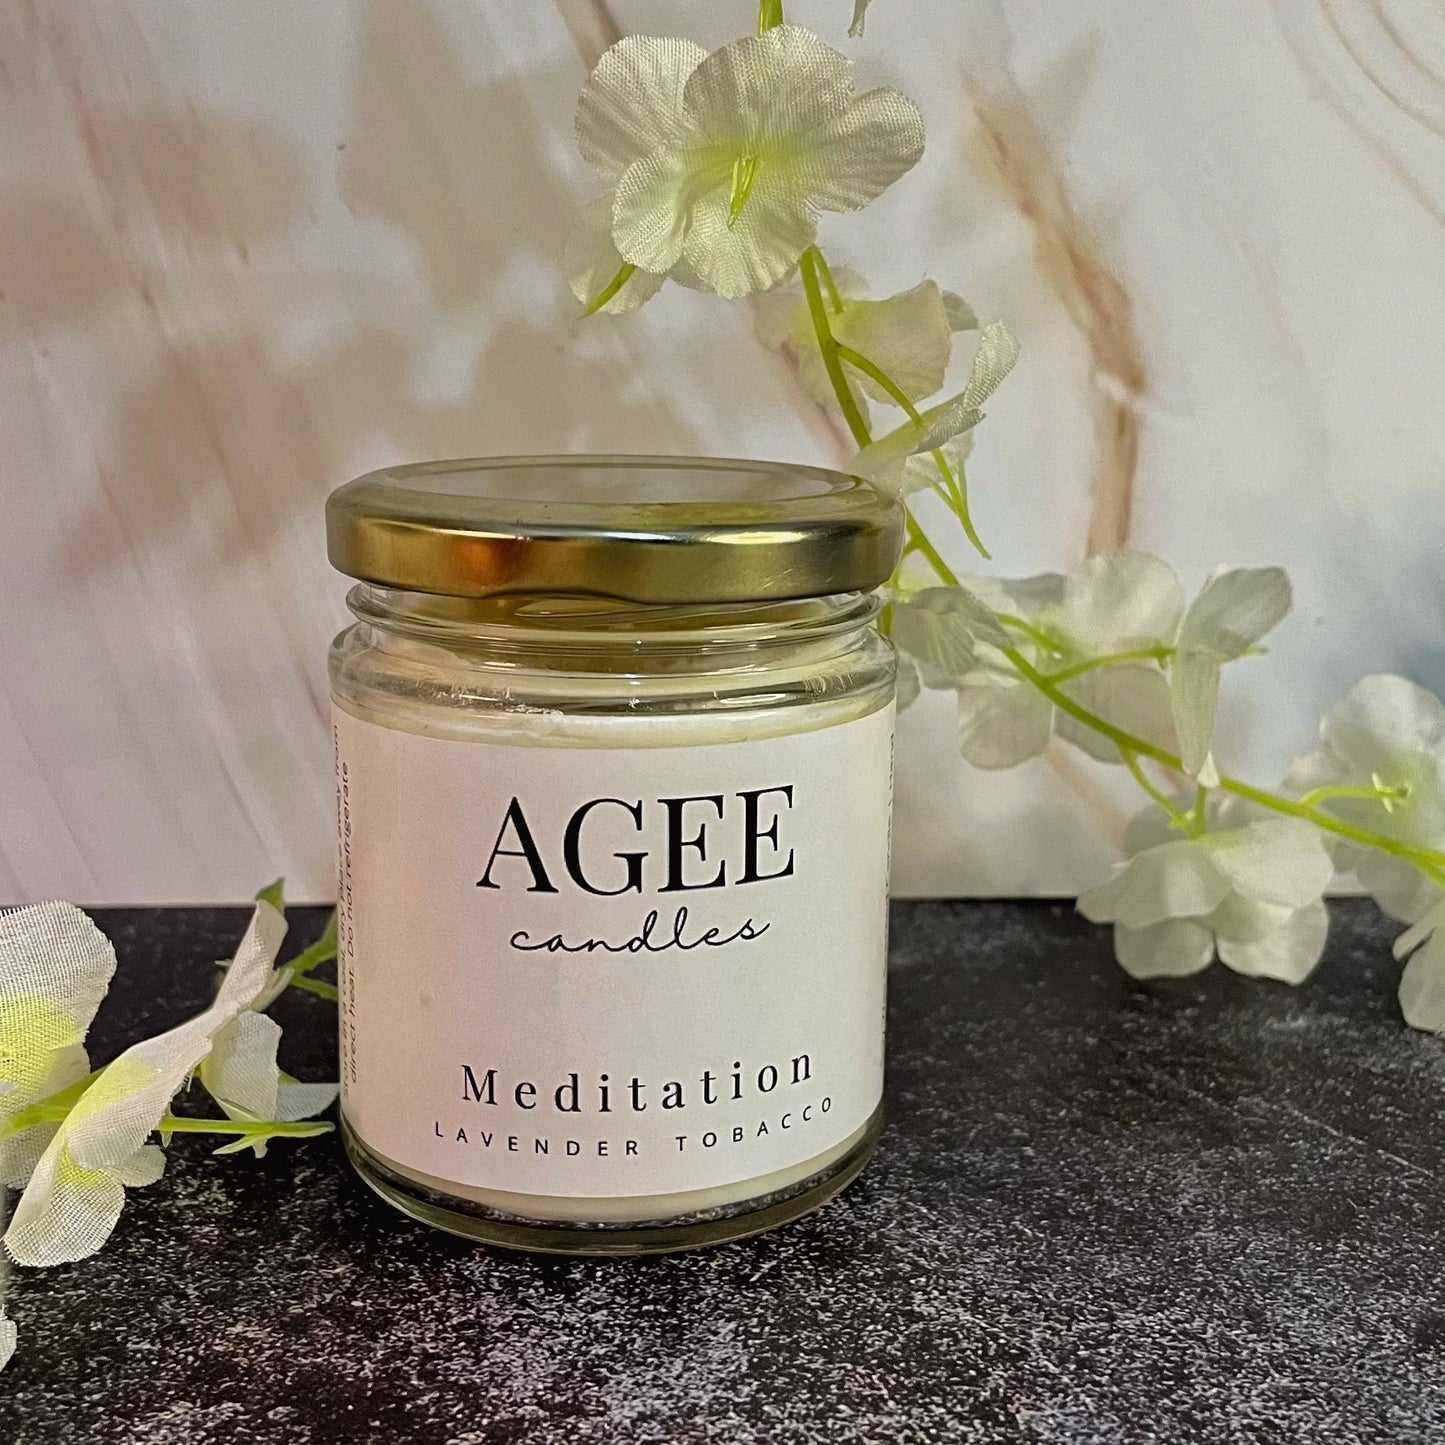 Meditation - Lavender Tobacco Scented Candle - Clear Jar - AGEE Candles